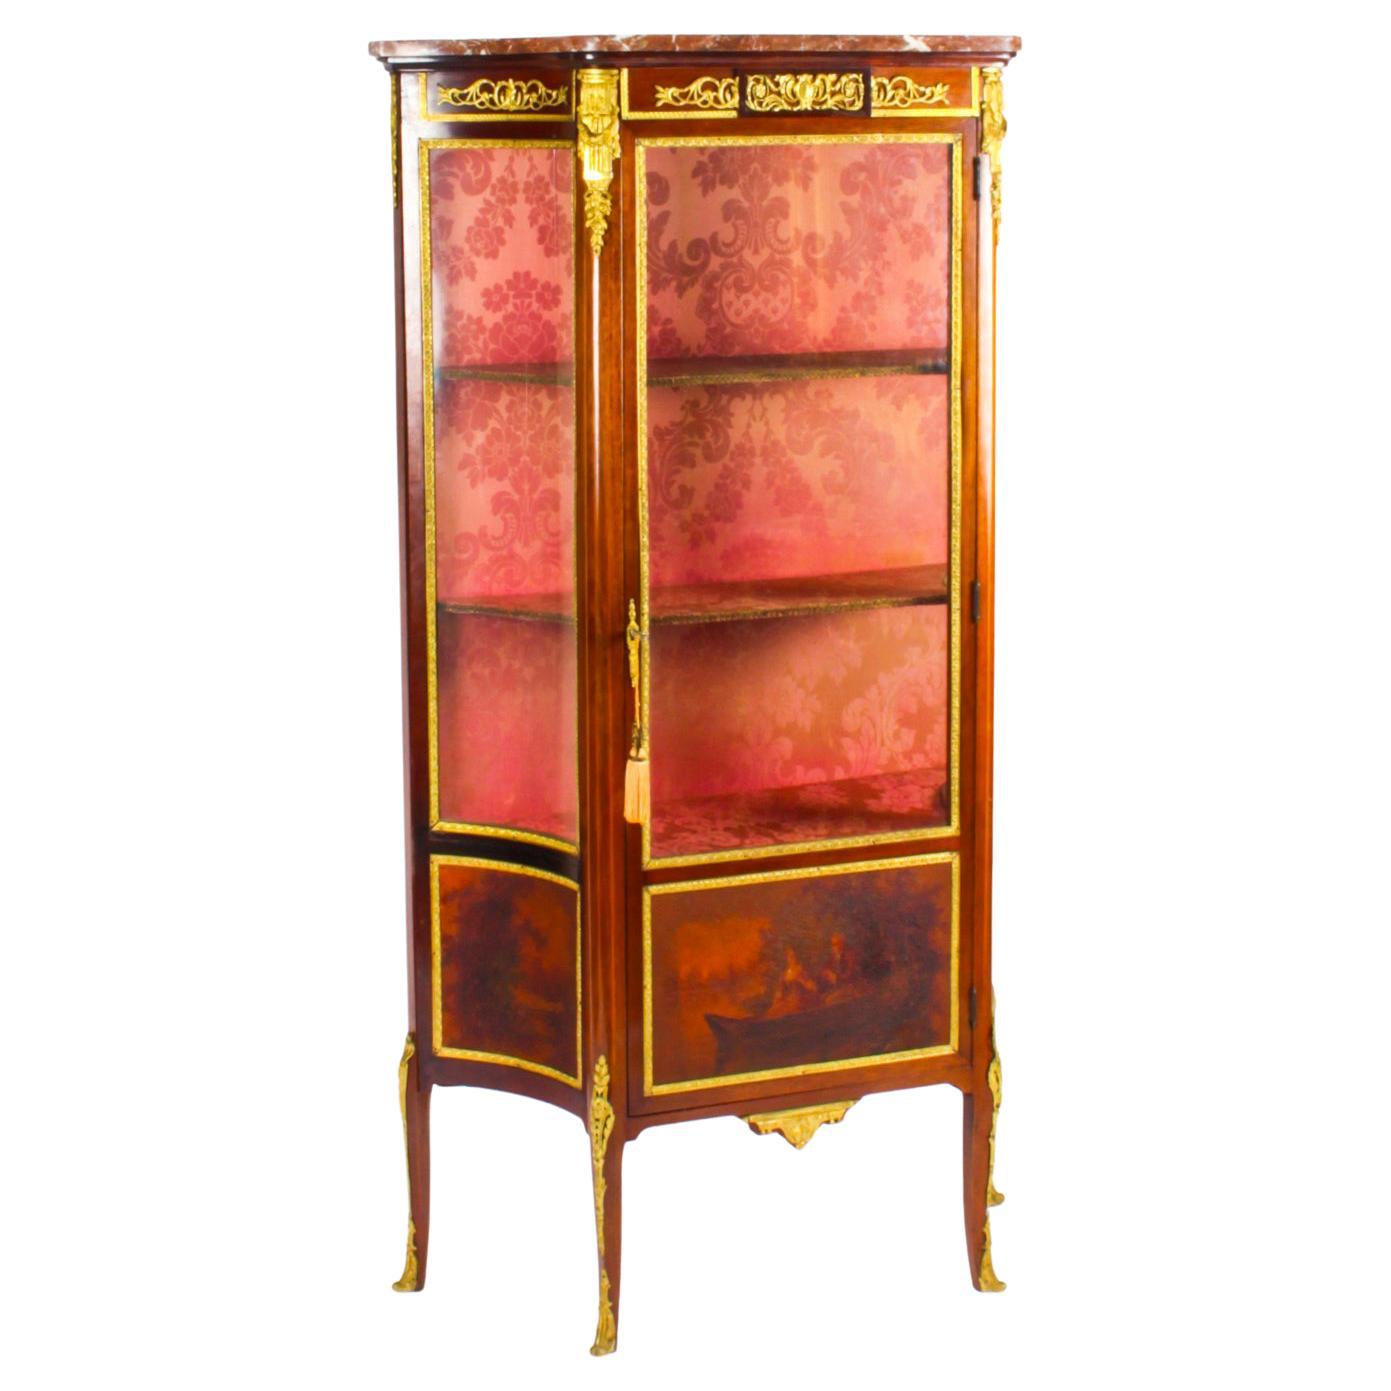 Antique French Vernis Martin Display Cabinet, 19th Century